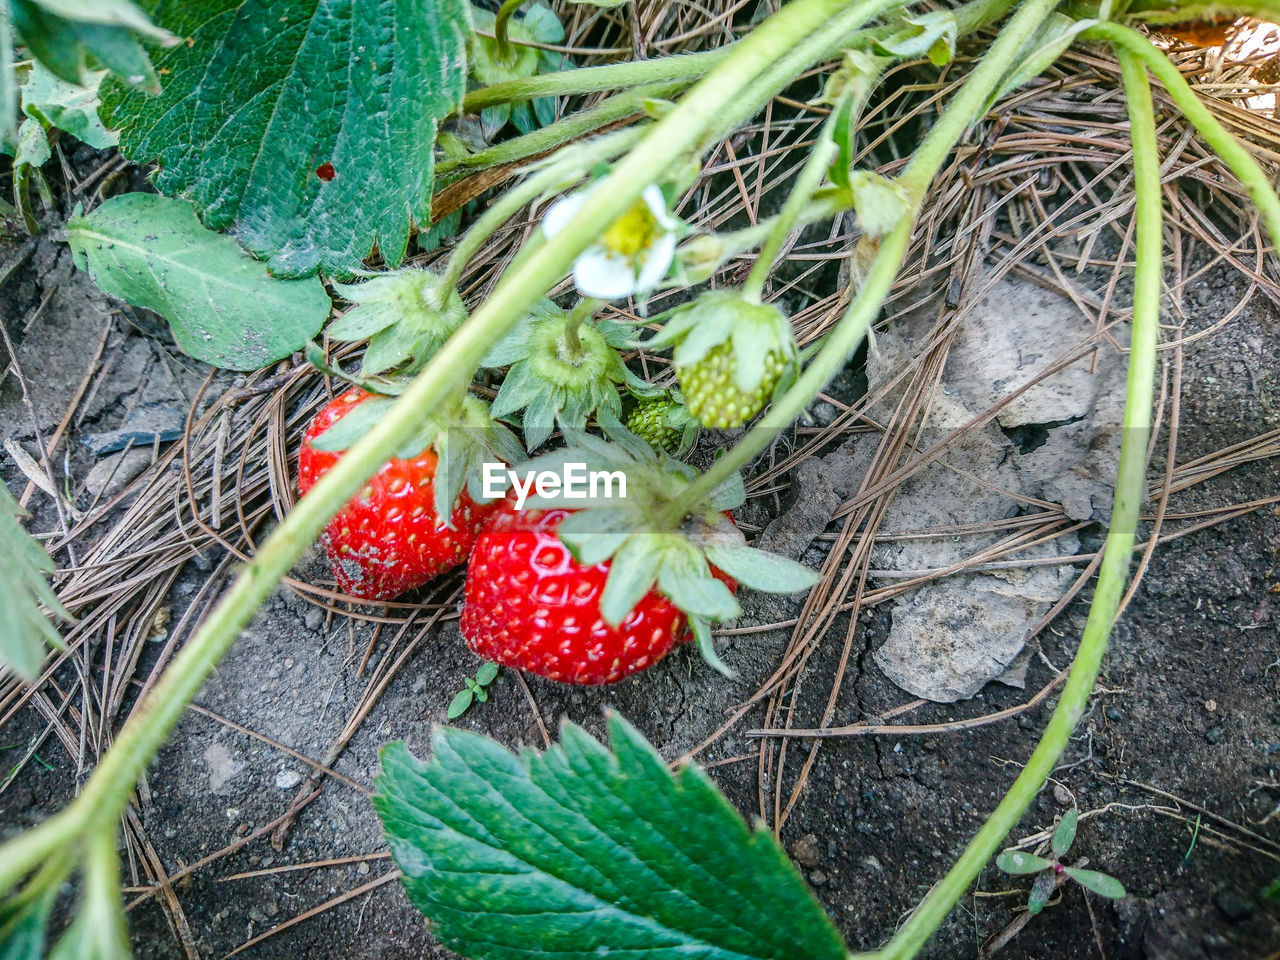 HIGH ANGLE VIEW OF BERRIES ON PLANT